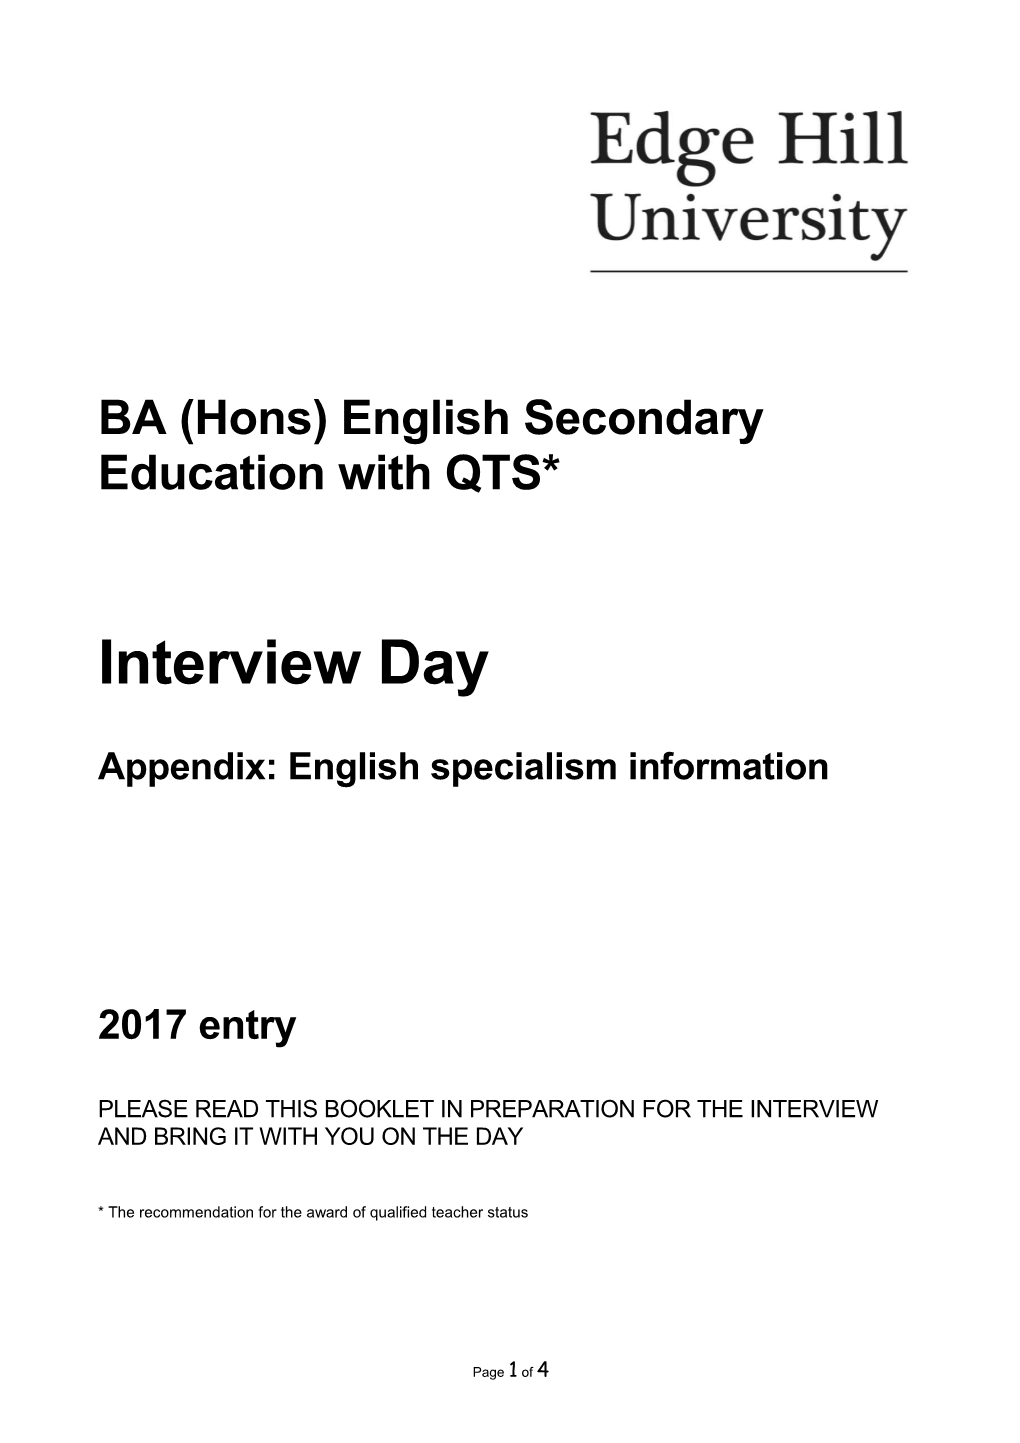 BA (Hons) English Secondary Education with QTS*